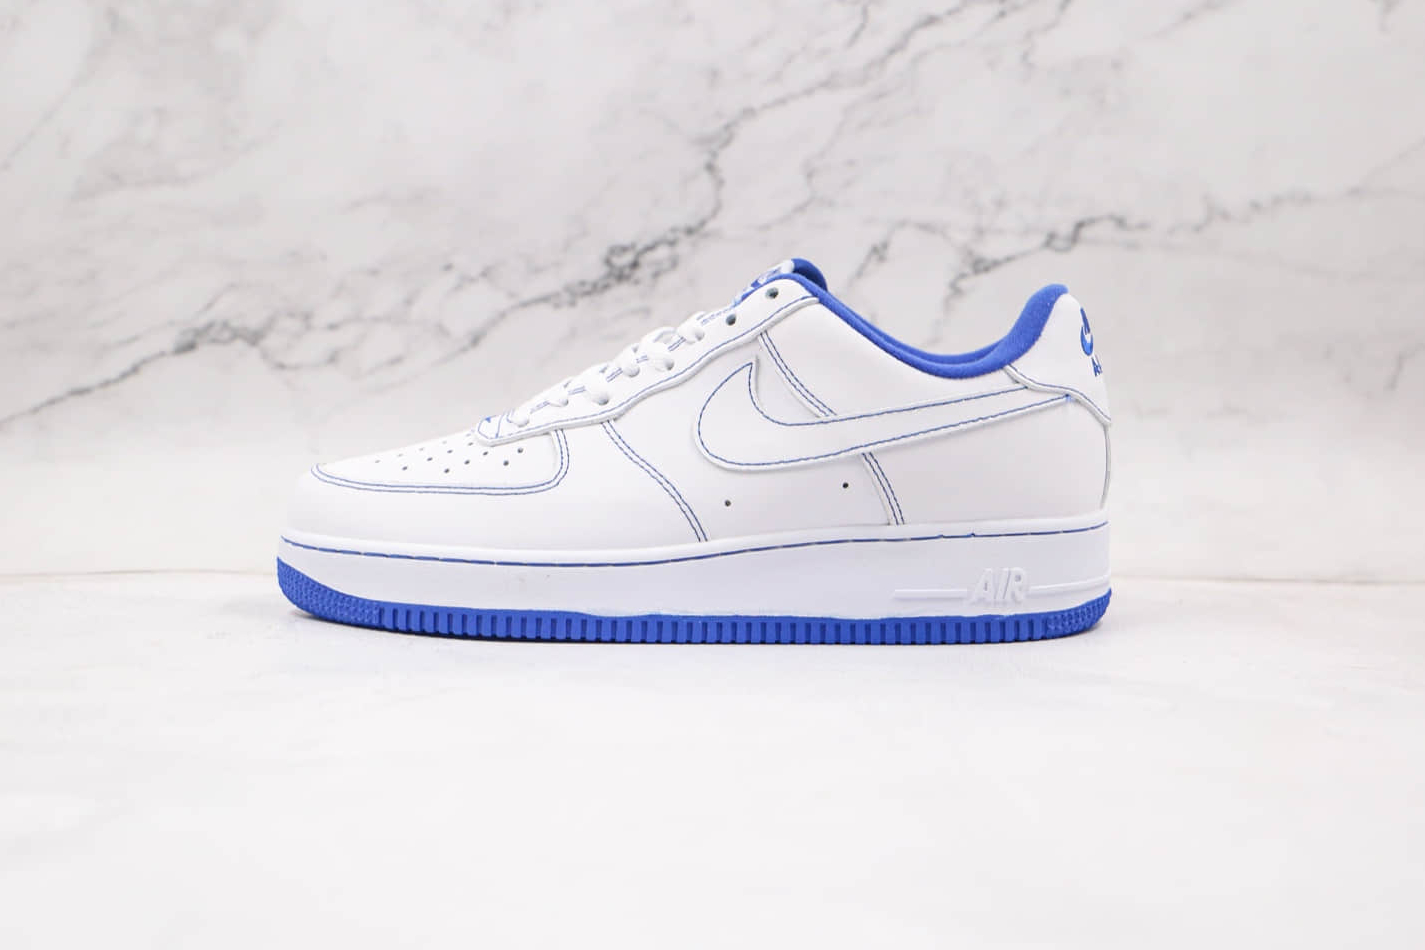 Nike Air Force 1 Low White Navy Blue CV1752-101 - Stylish and Classic Footwear